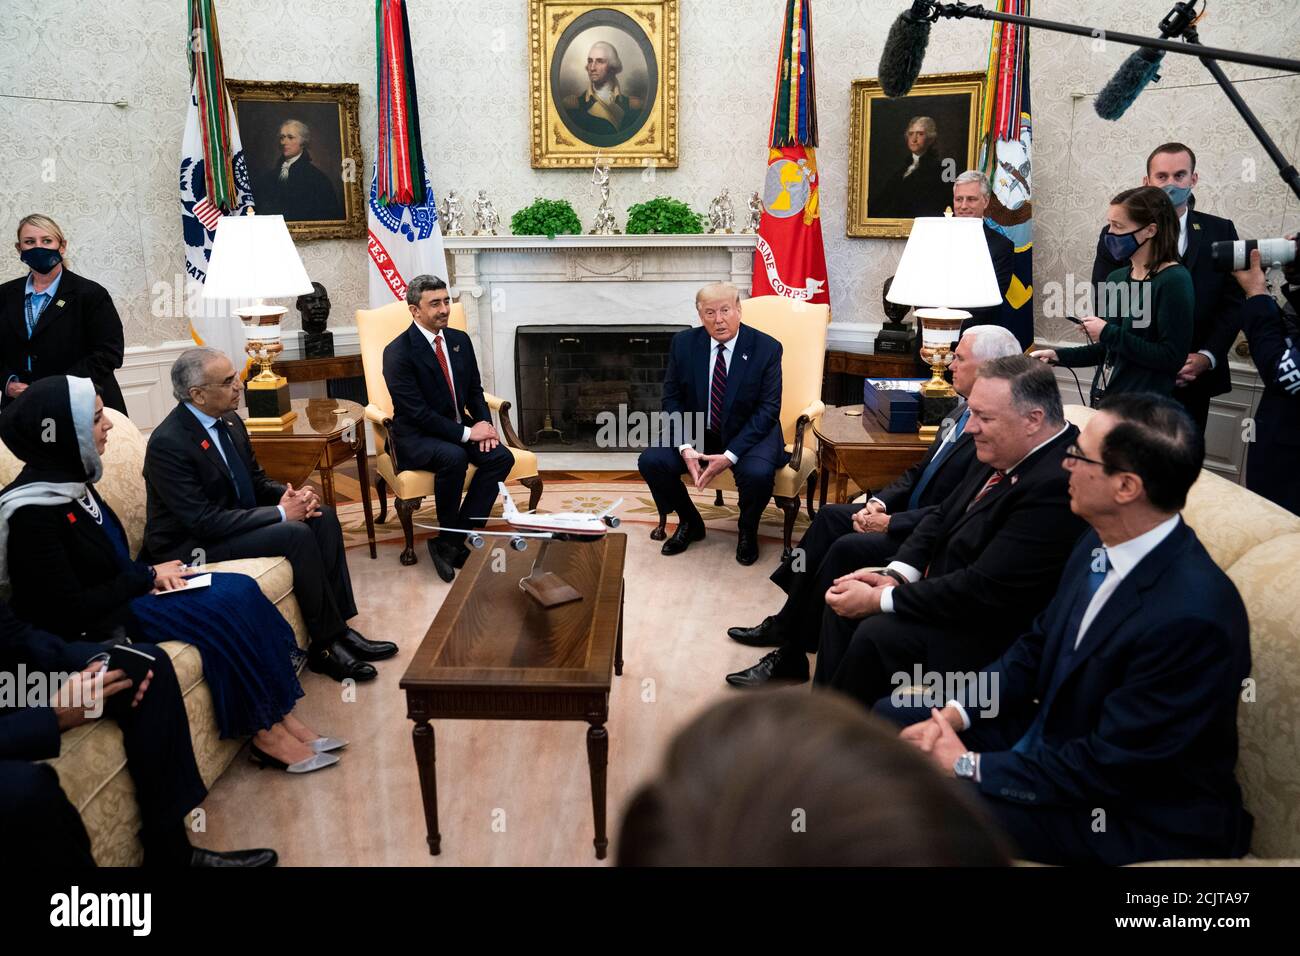 President Donald Trump meets with Abdullah bin Zayed bin Sultan Al Nahyan, Minister of Foreign Affairs and International Cooperation of the United Arab Emirates in the Oval Office of the White House in Washington, DC, Tuesday, Sept. 15, 2020. Credit: Doug Mills/Pool via CNPPresident Donald Trump meets with Abdullah bin Zayed bin Sultan Al Nahyan, Minister of Foreign Affairs and International Cooperation of the United Arab Emirates in the Oval Office of the White House in Washington, DC, Tuesday, Sept. 15, 2020. Credit: Doug Mills/Pool via CNP /MediaPunch Stock Photo